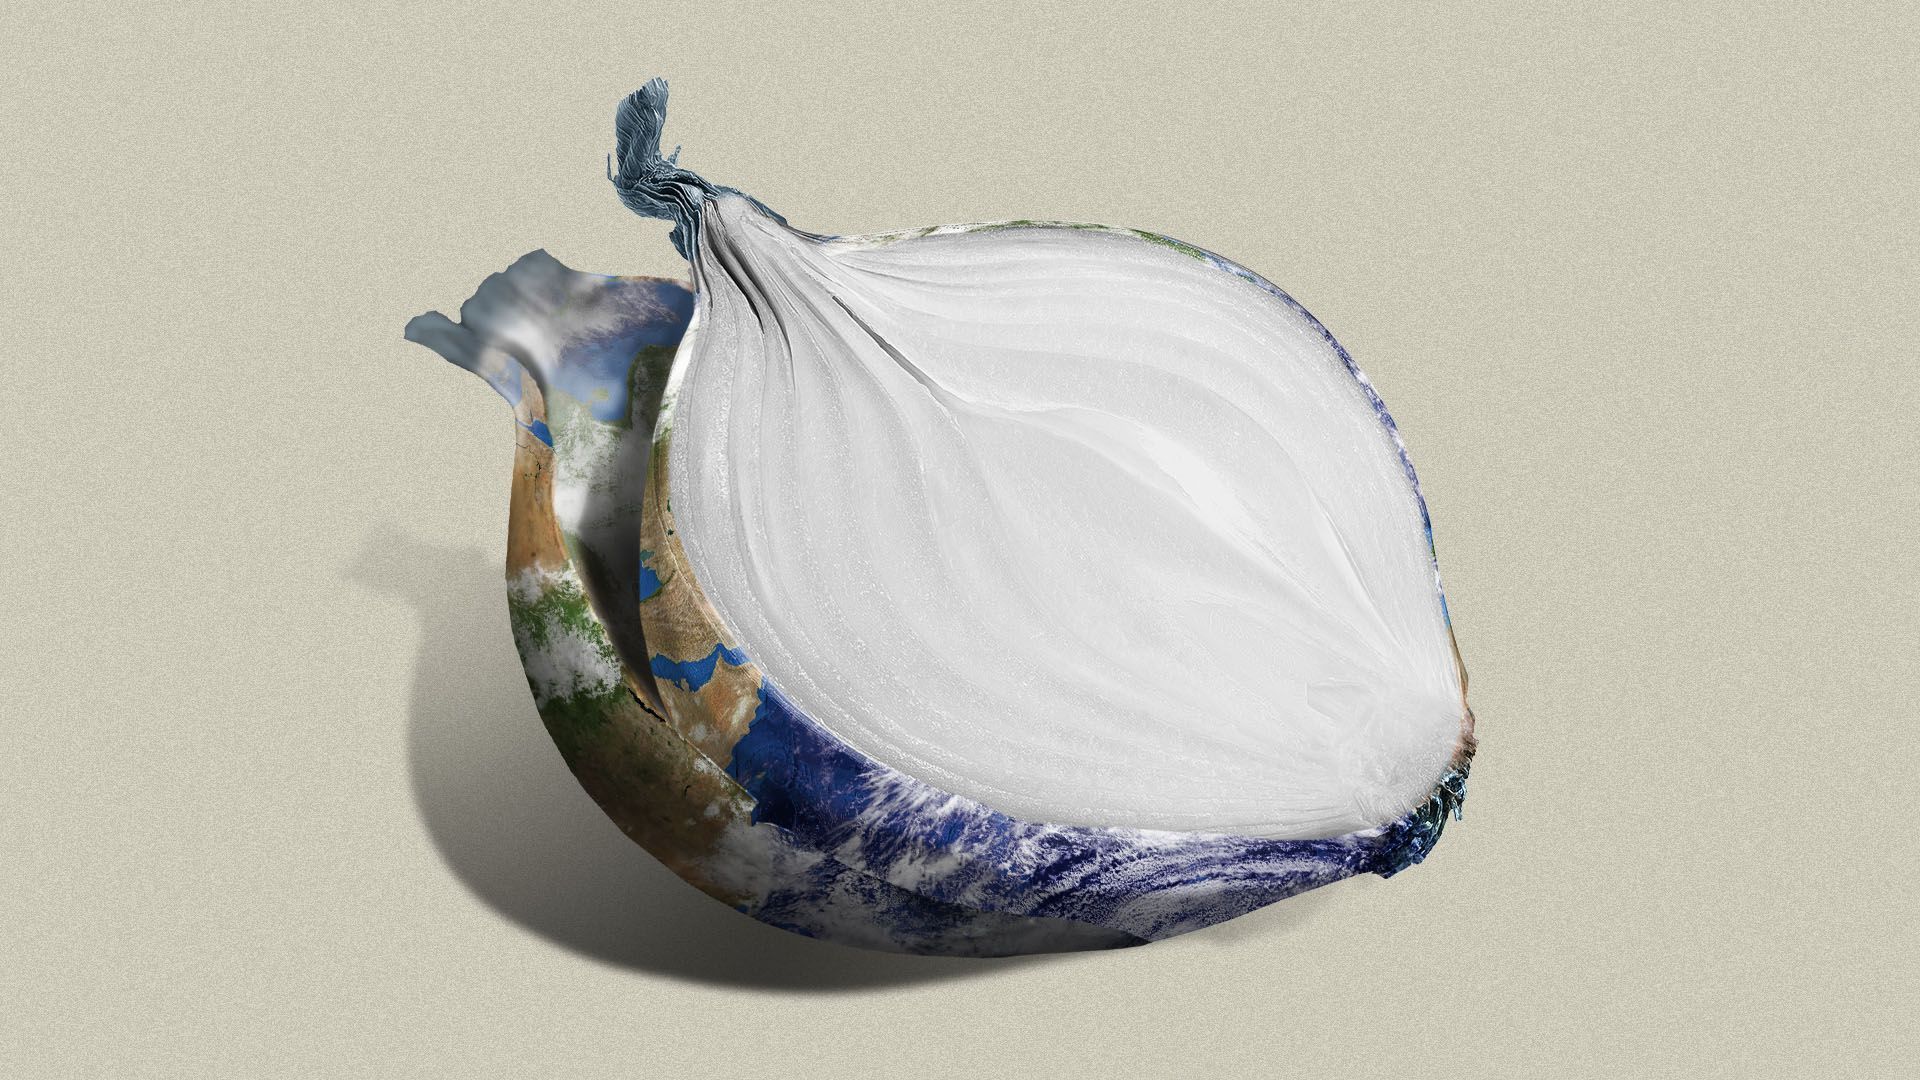 Illustration of an onion with skin like the crust of the earth sliced in half